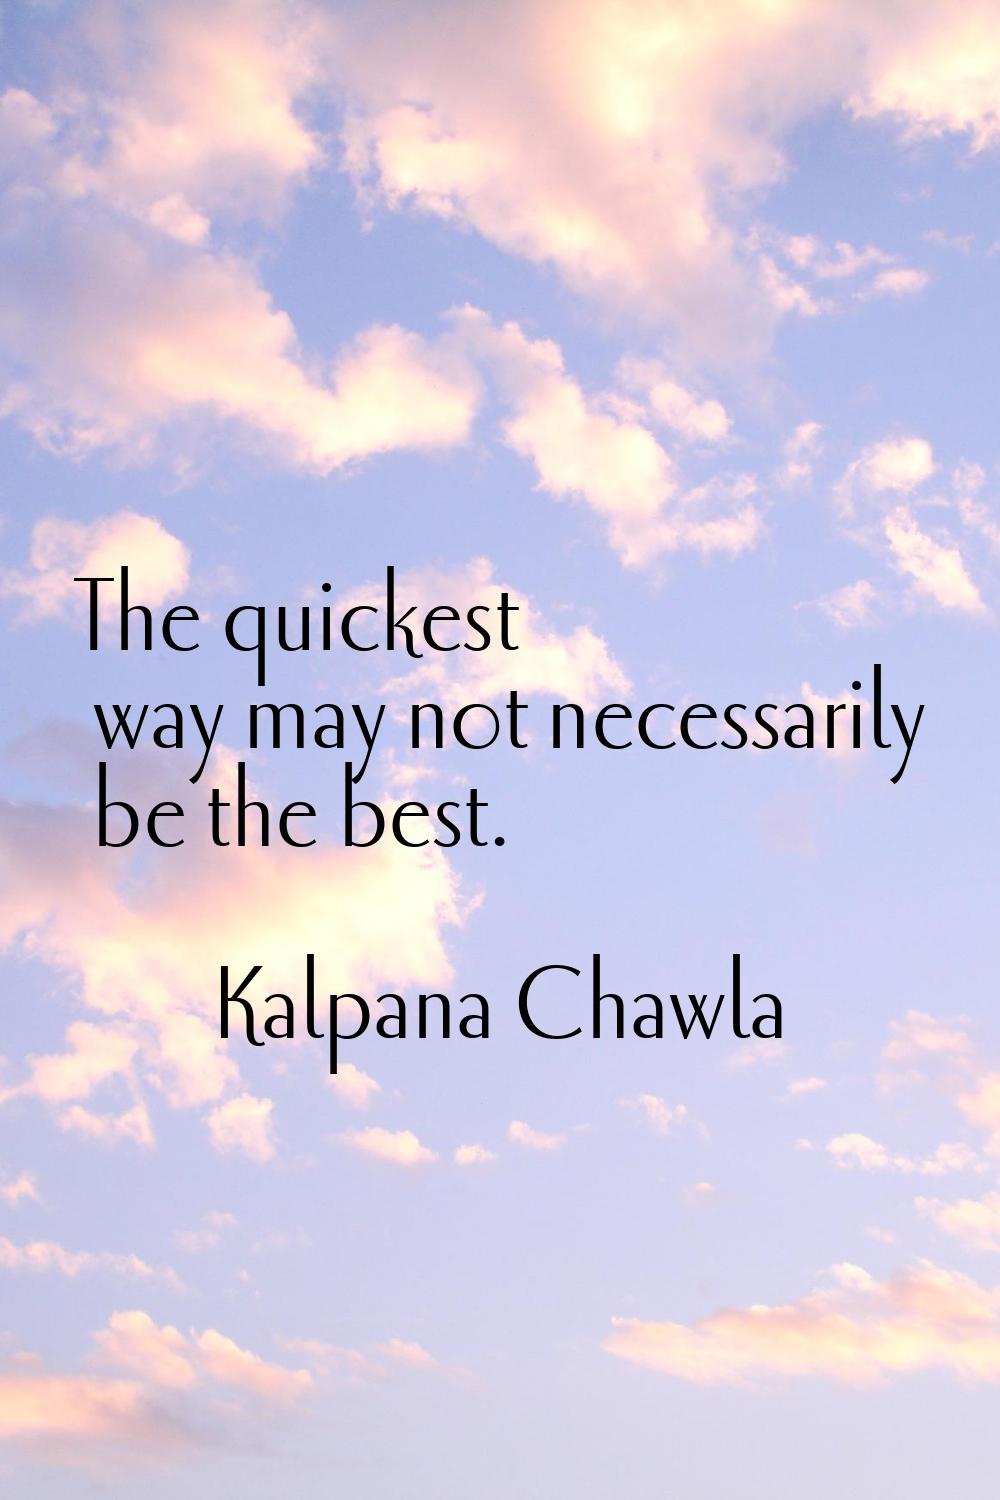 The quickest way may not necessarily be the best.